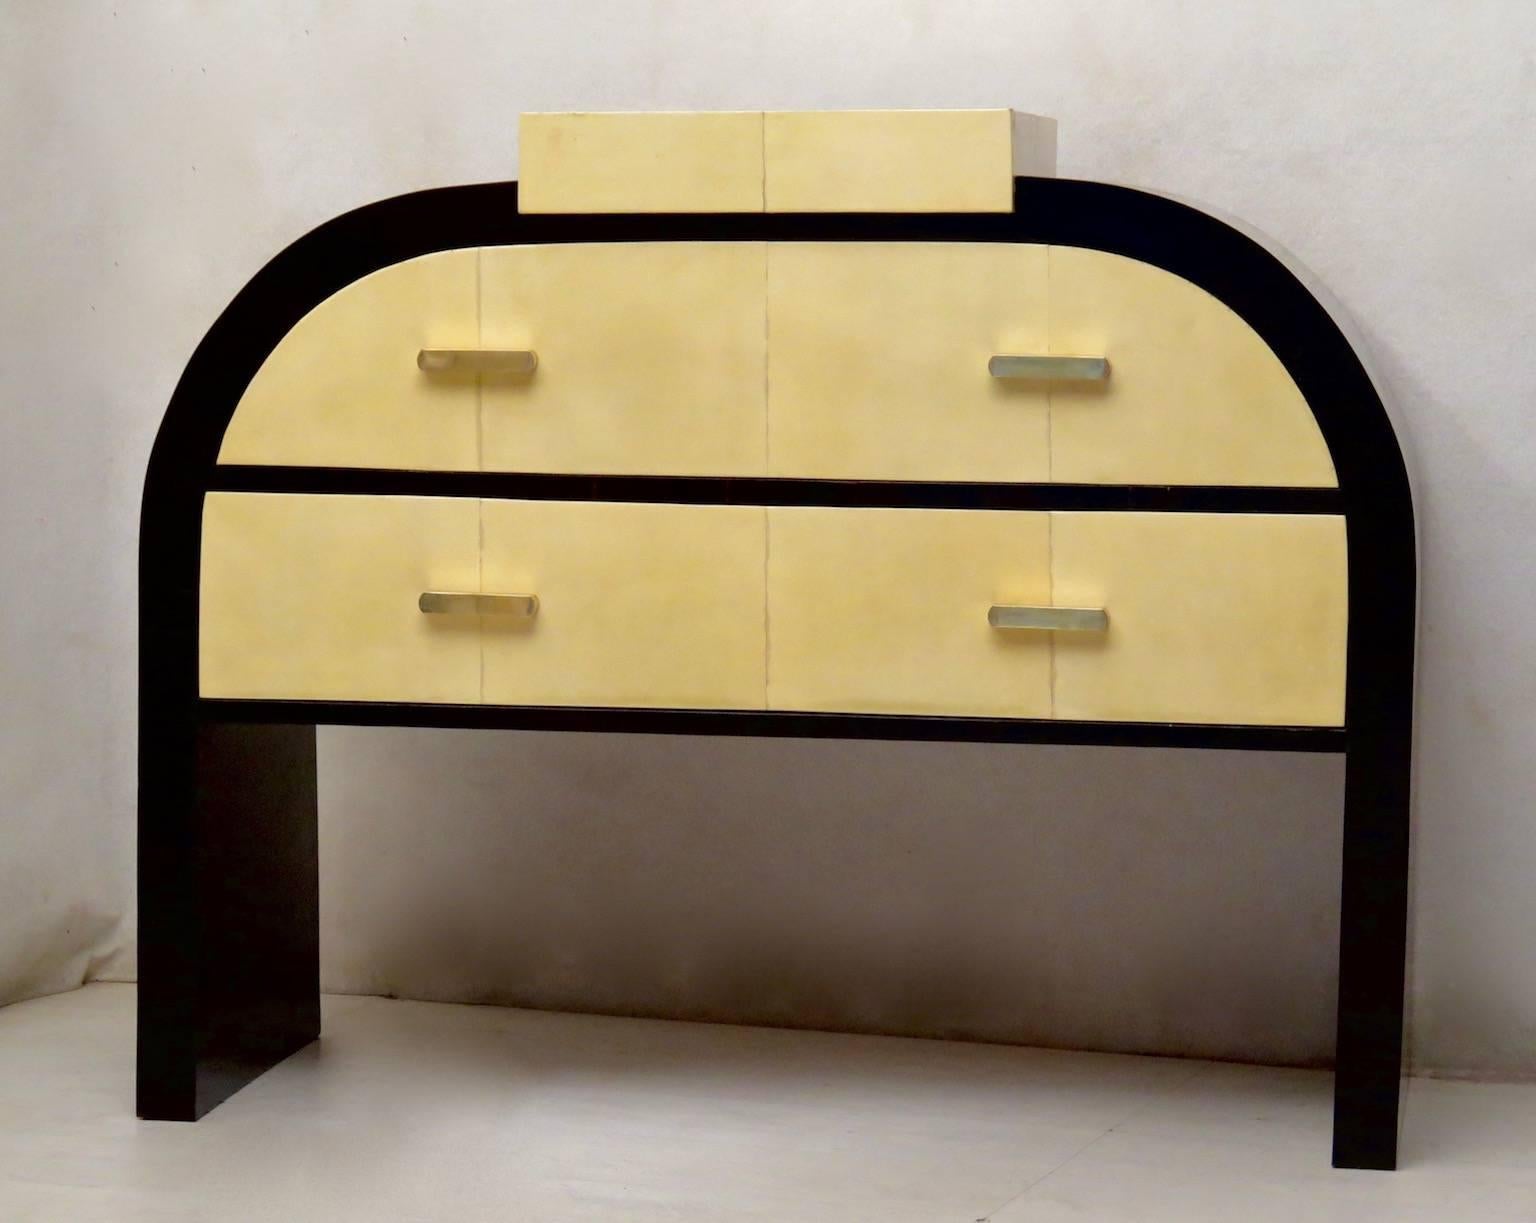 Sinuous shapes for this fine piece of furniture from the first half of the 20th century.

All veneered in ebony Macassar wood, with the two drawers and little top covered in goat skin or parchment leather. The dresser top can be pulled up. As you